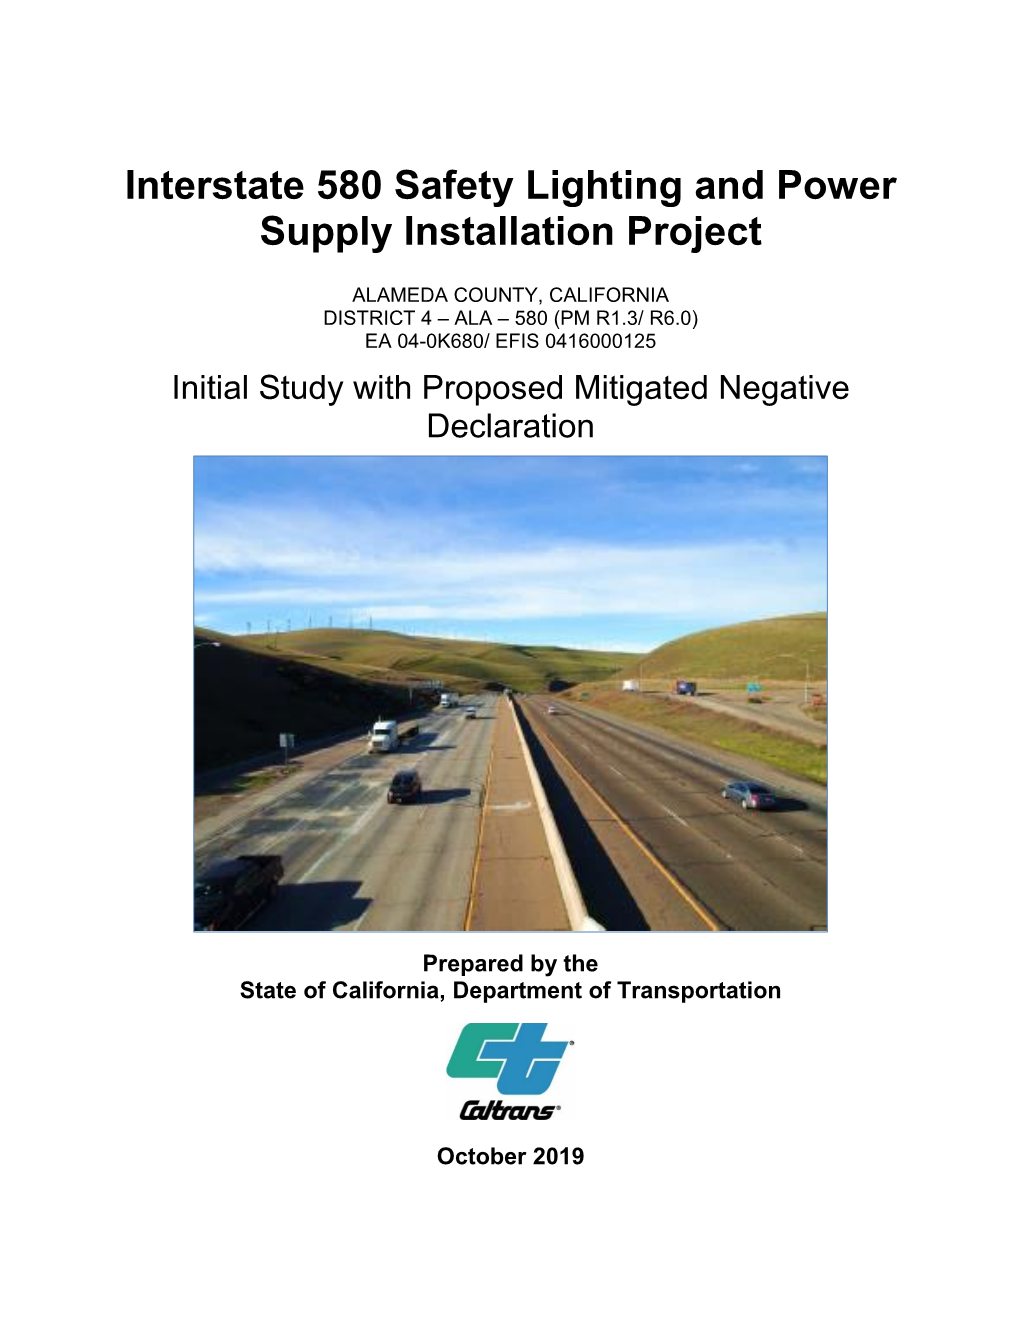 Interstate 580 Safety Lighting and Power Supply Installation Project